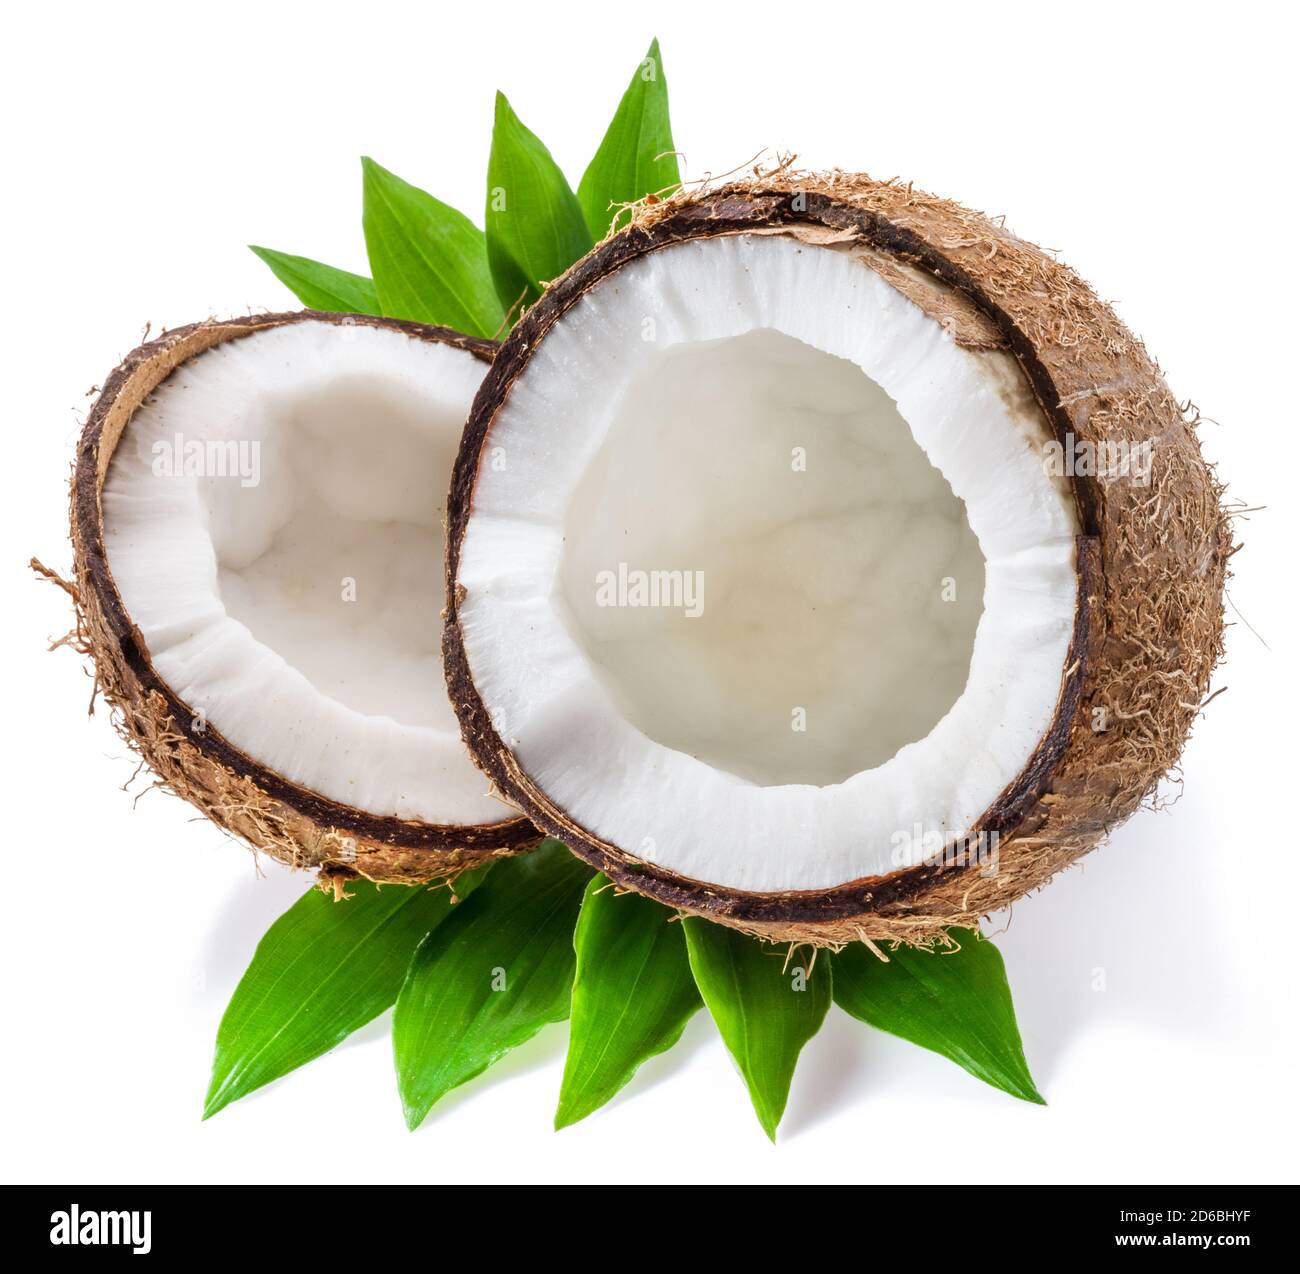 Split coconut fruit with white flesh over green leaves isolated on white background. Stock Photo